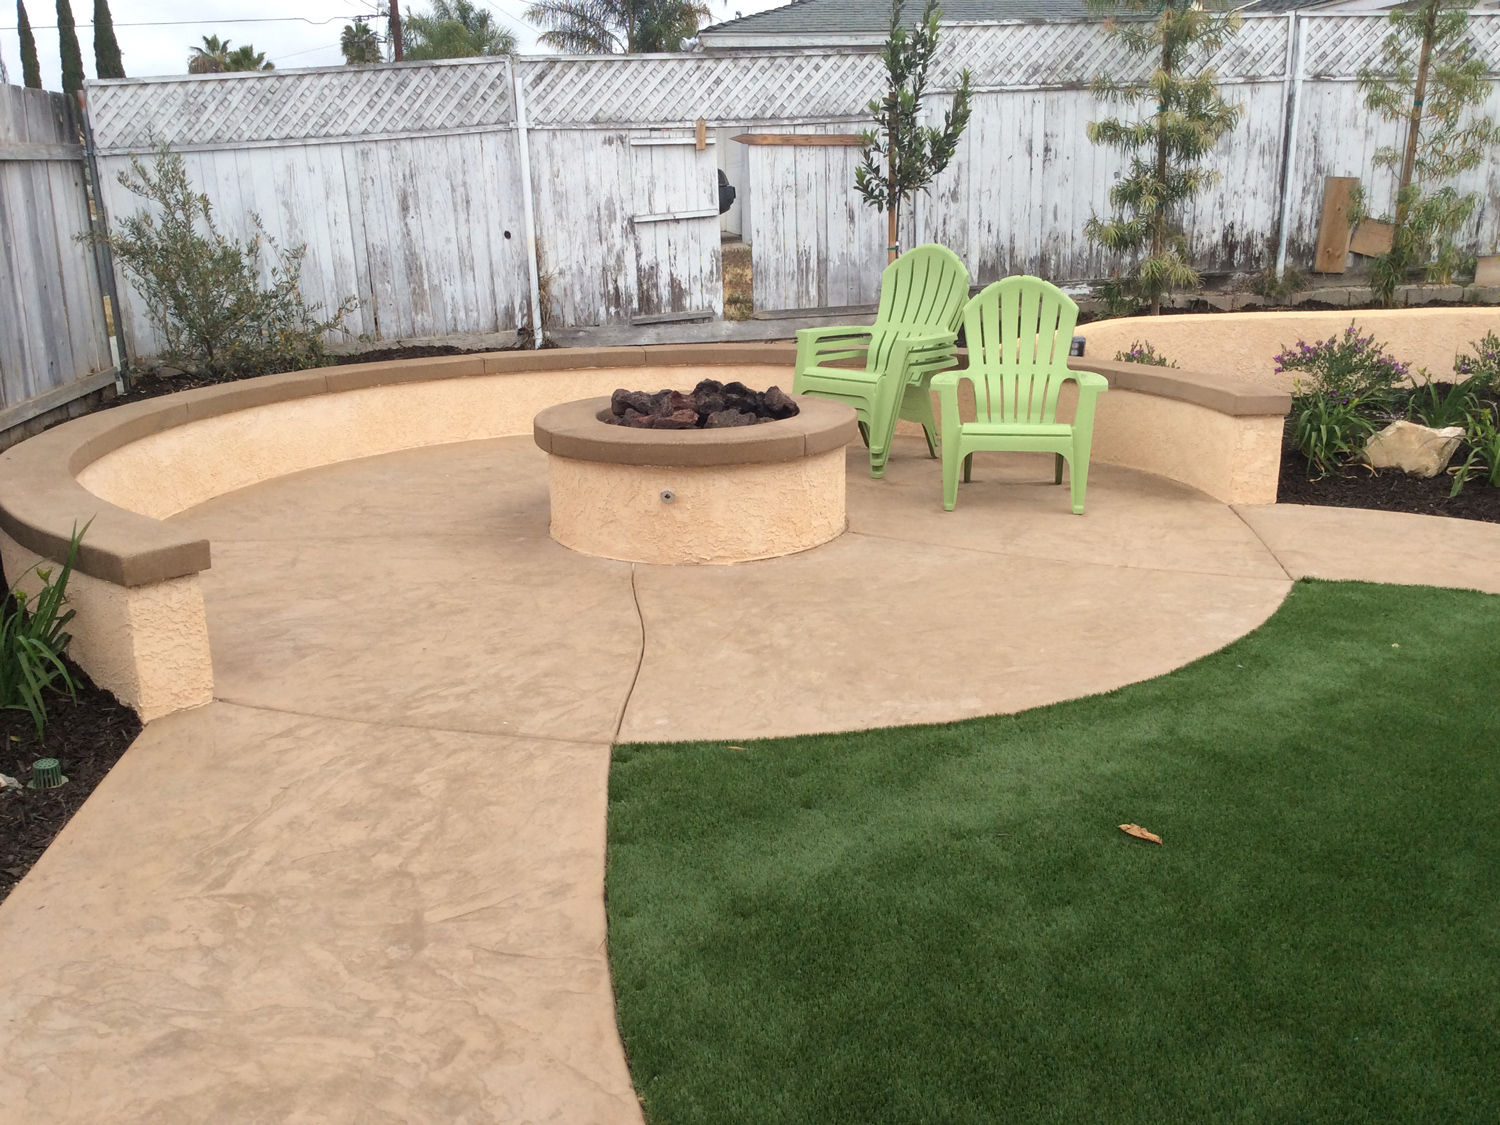 Fire pit with sitting wall and artificial turf in Oceanside McCabe's Landscape Construction